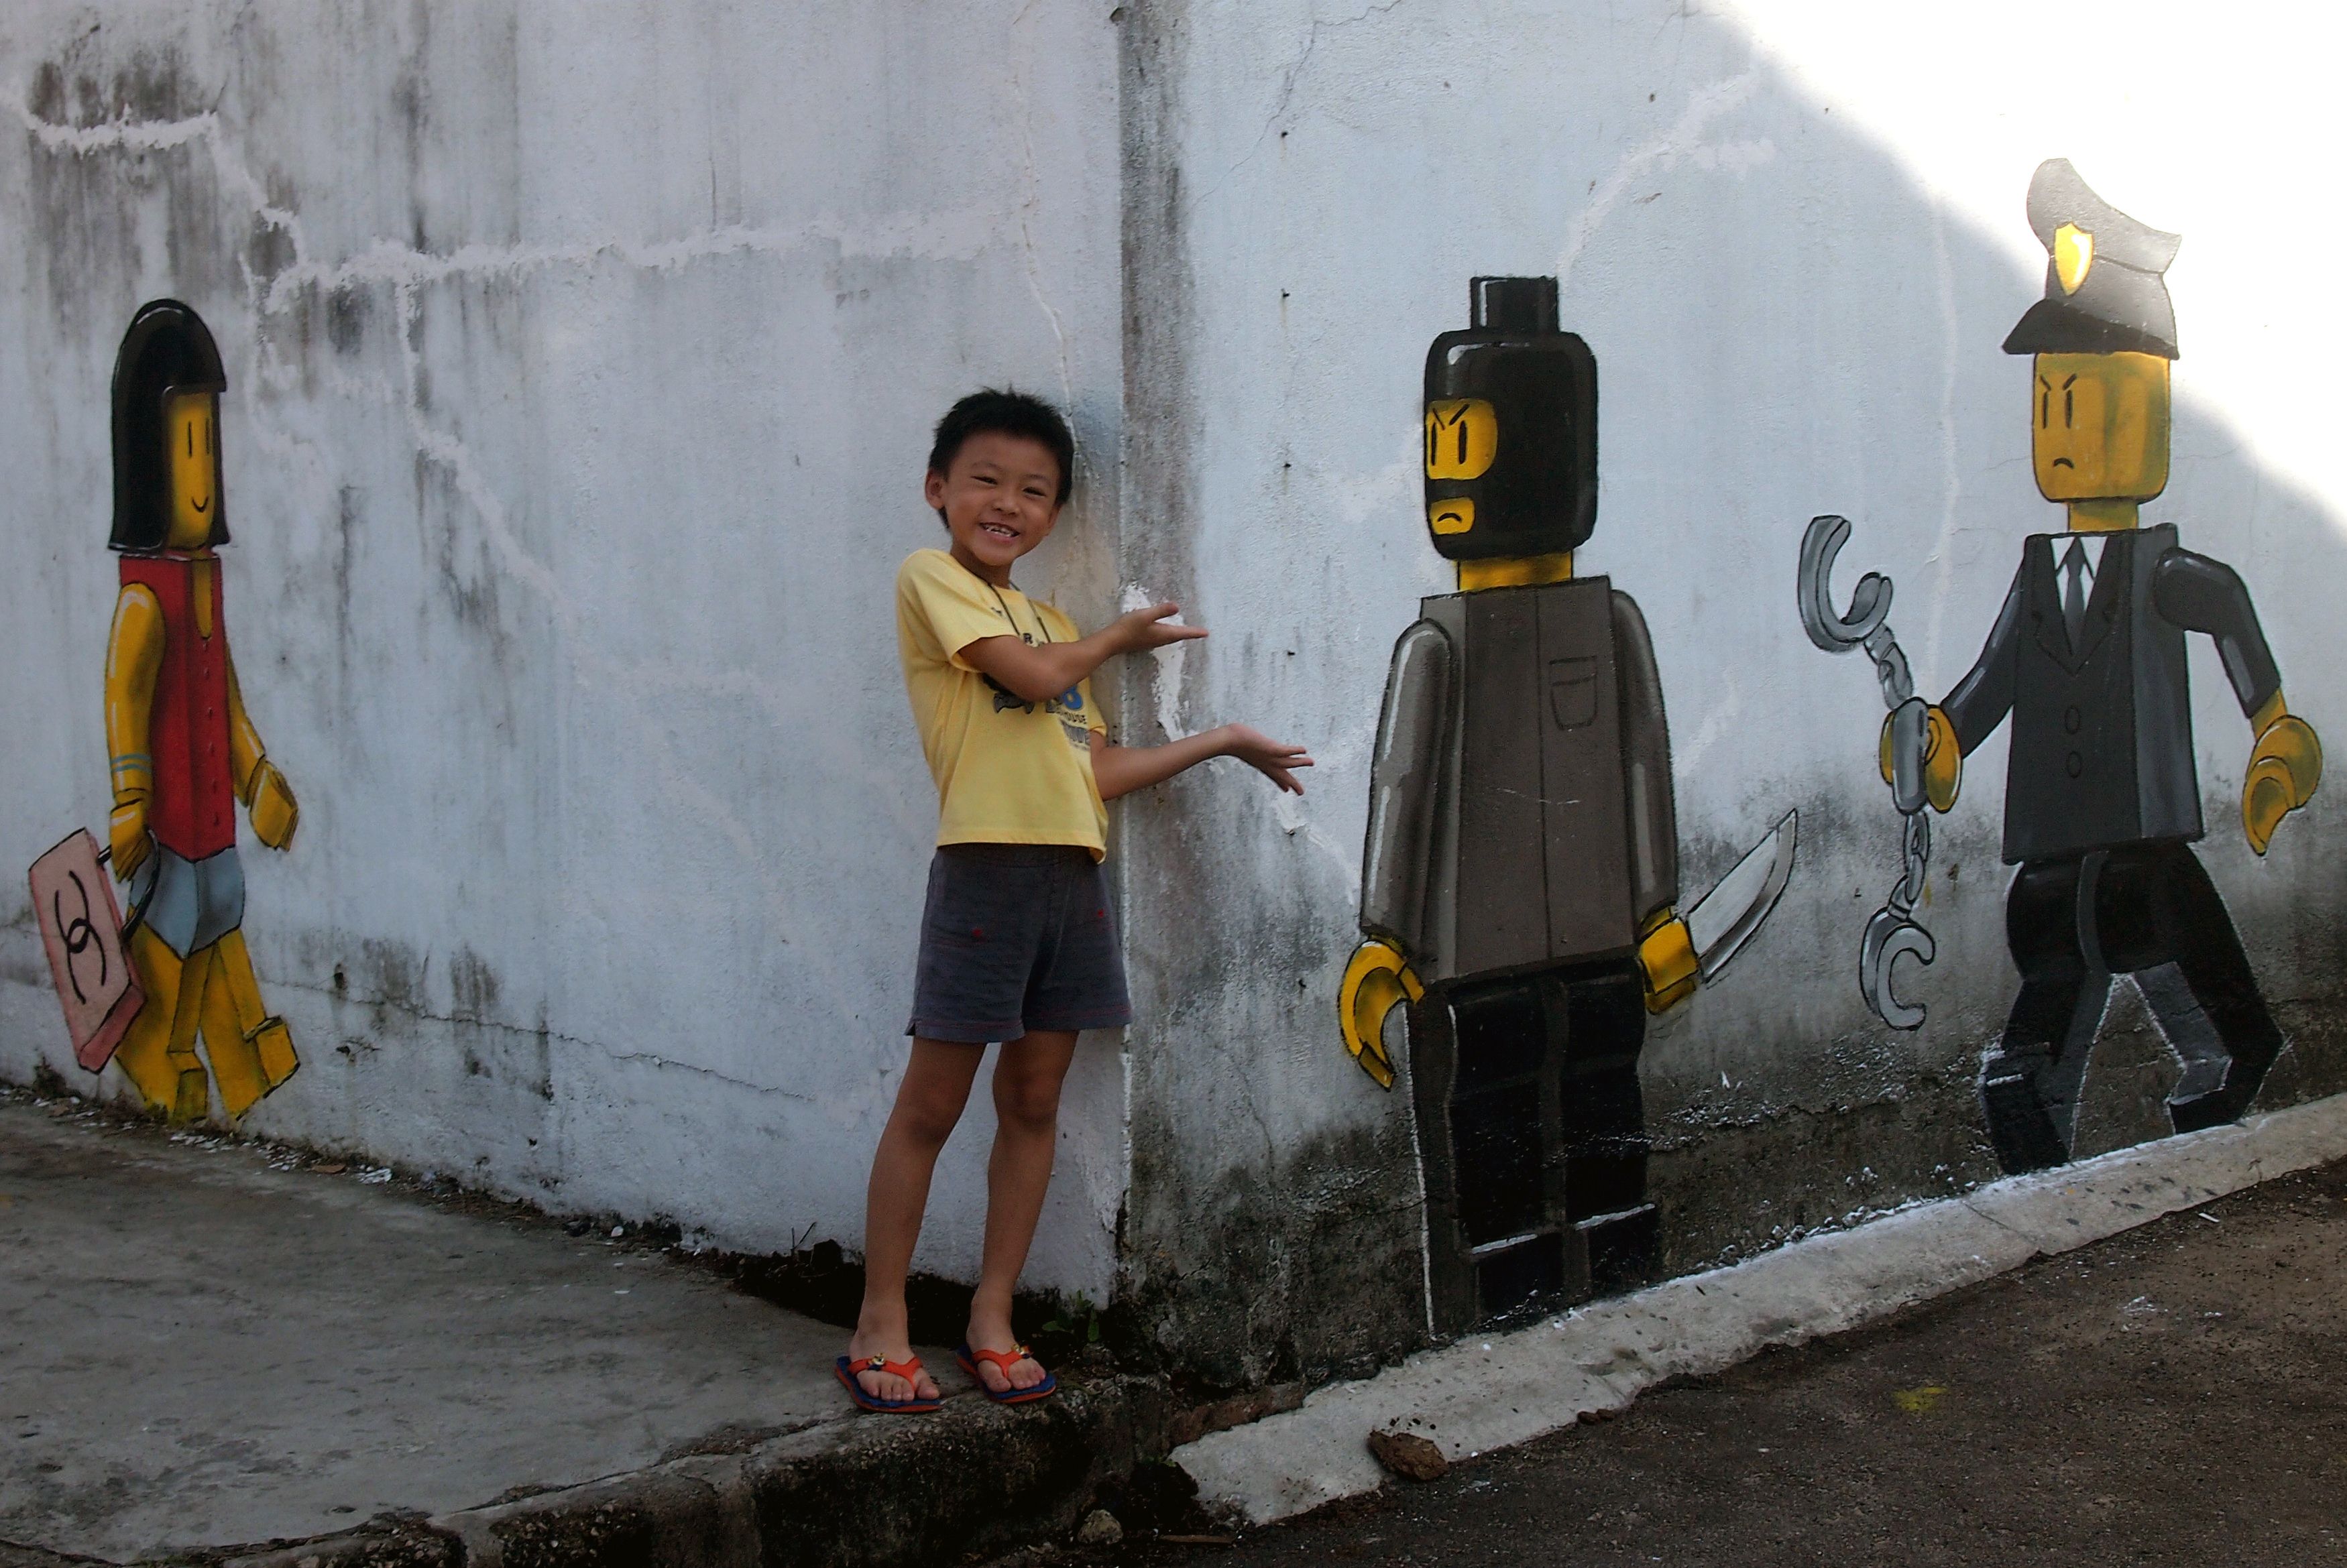 A boy next to a mural by Lithuanian artist Ernest Zacharevic, which shows a Lego woman with a Chanel bag, a Lego robber armed with a knife and a Malaysian policeman in Johor Bahru. Photo: AFP